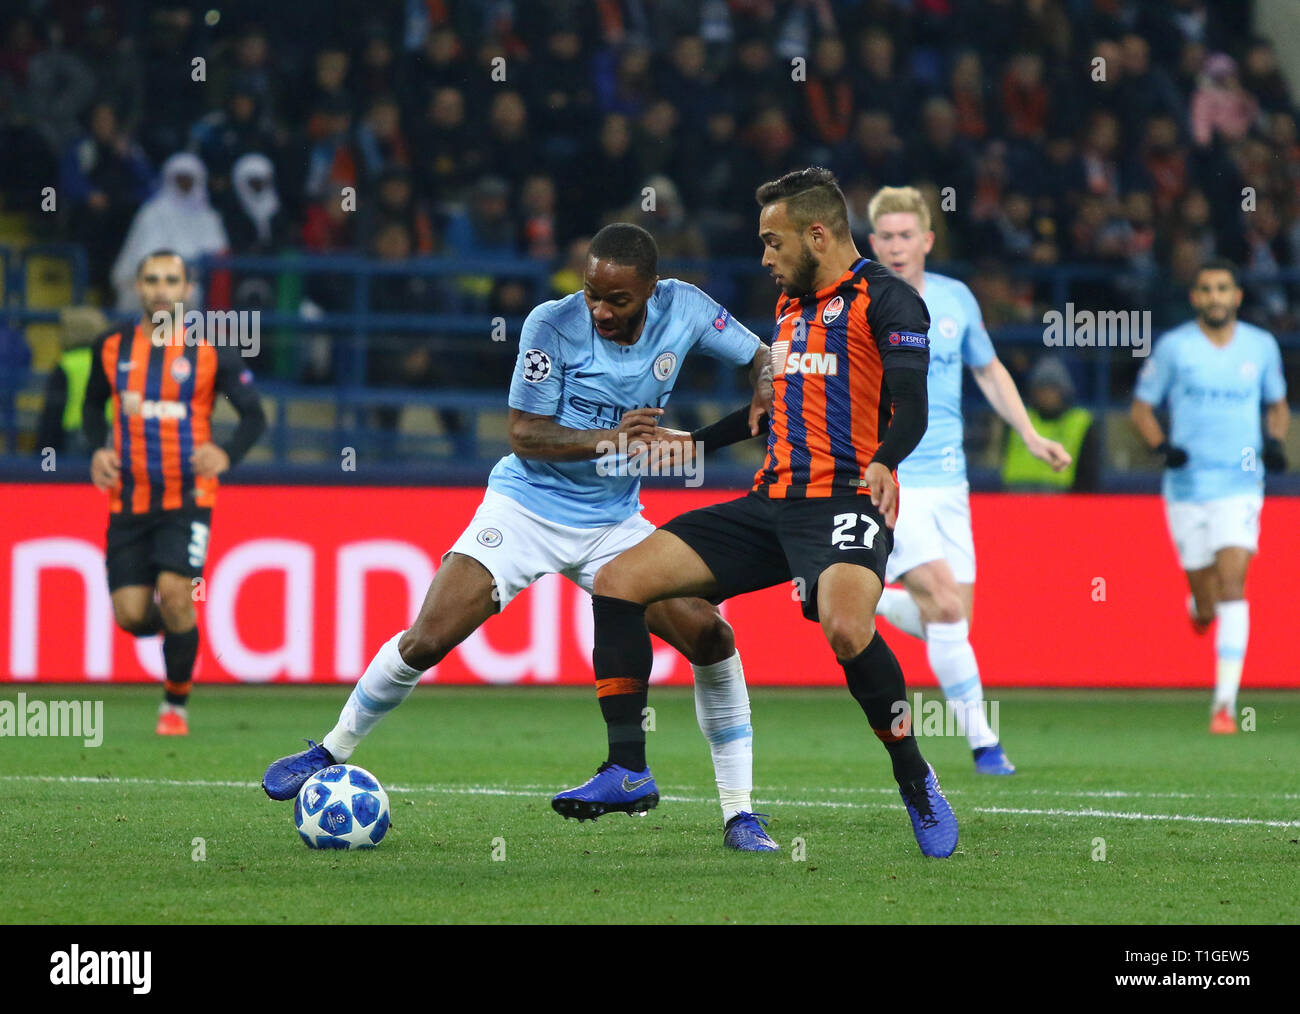 KHARKIV, UKRAINE - OCTOBER 23, 2018: Raheem Sterling of Manchester City (L) fights for a ball with Maycon of Shakhtar Donetsk during their UEFA Champi Stock Photo